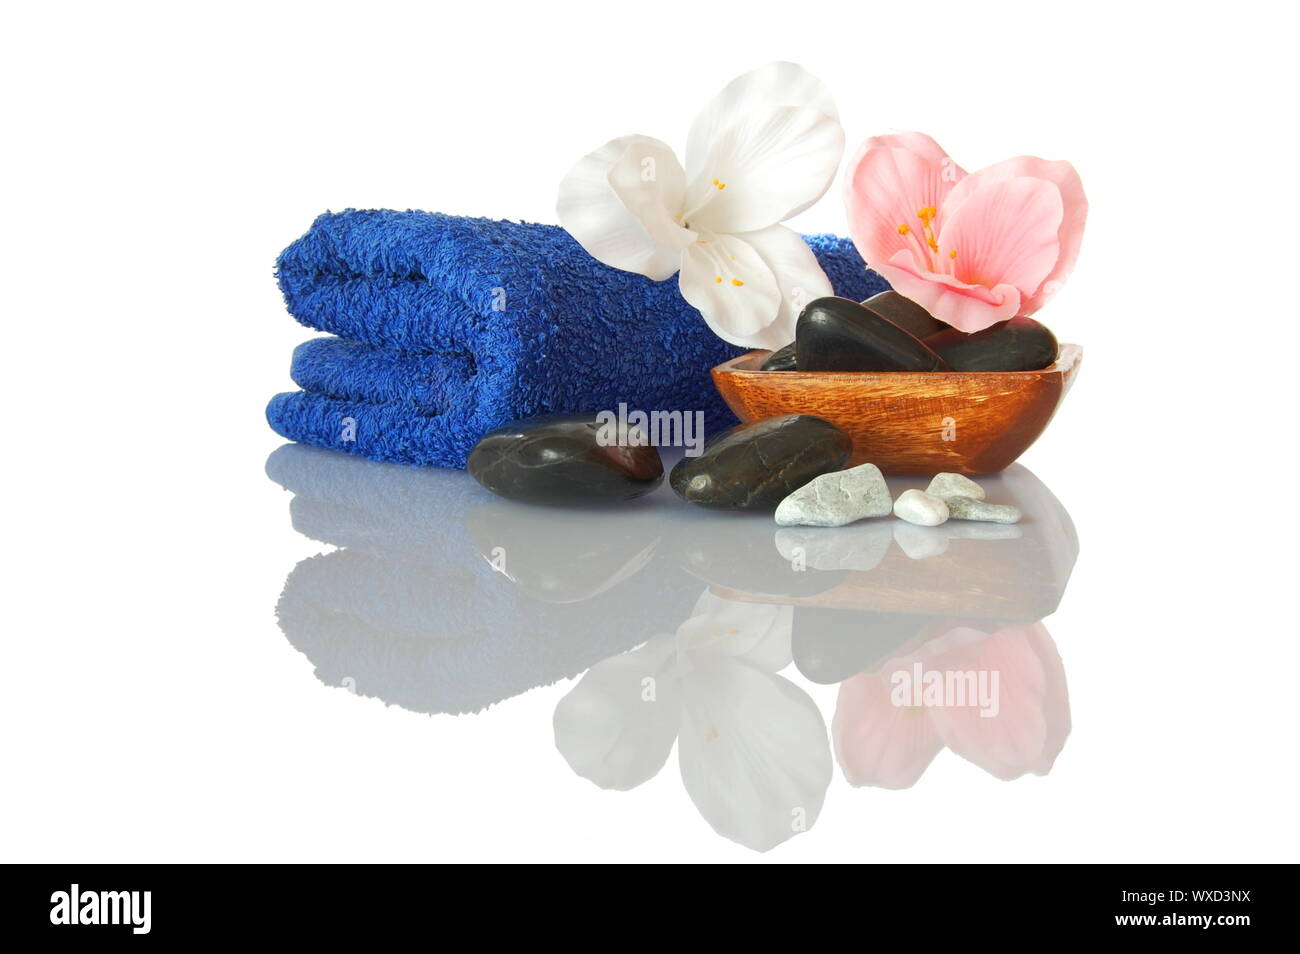 spa still life with towel and flower showing wellness concept Stock Photo